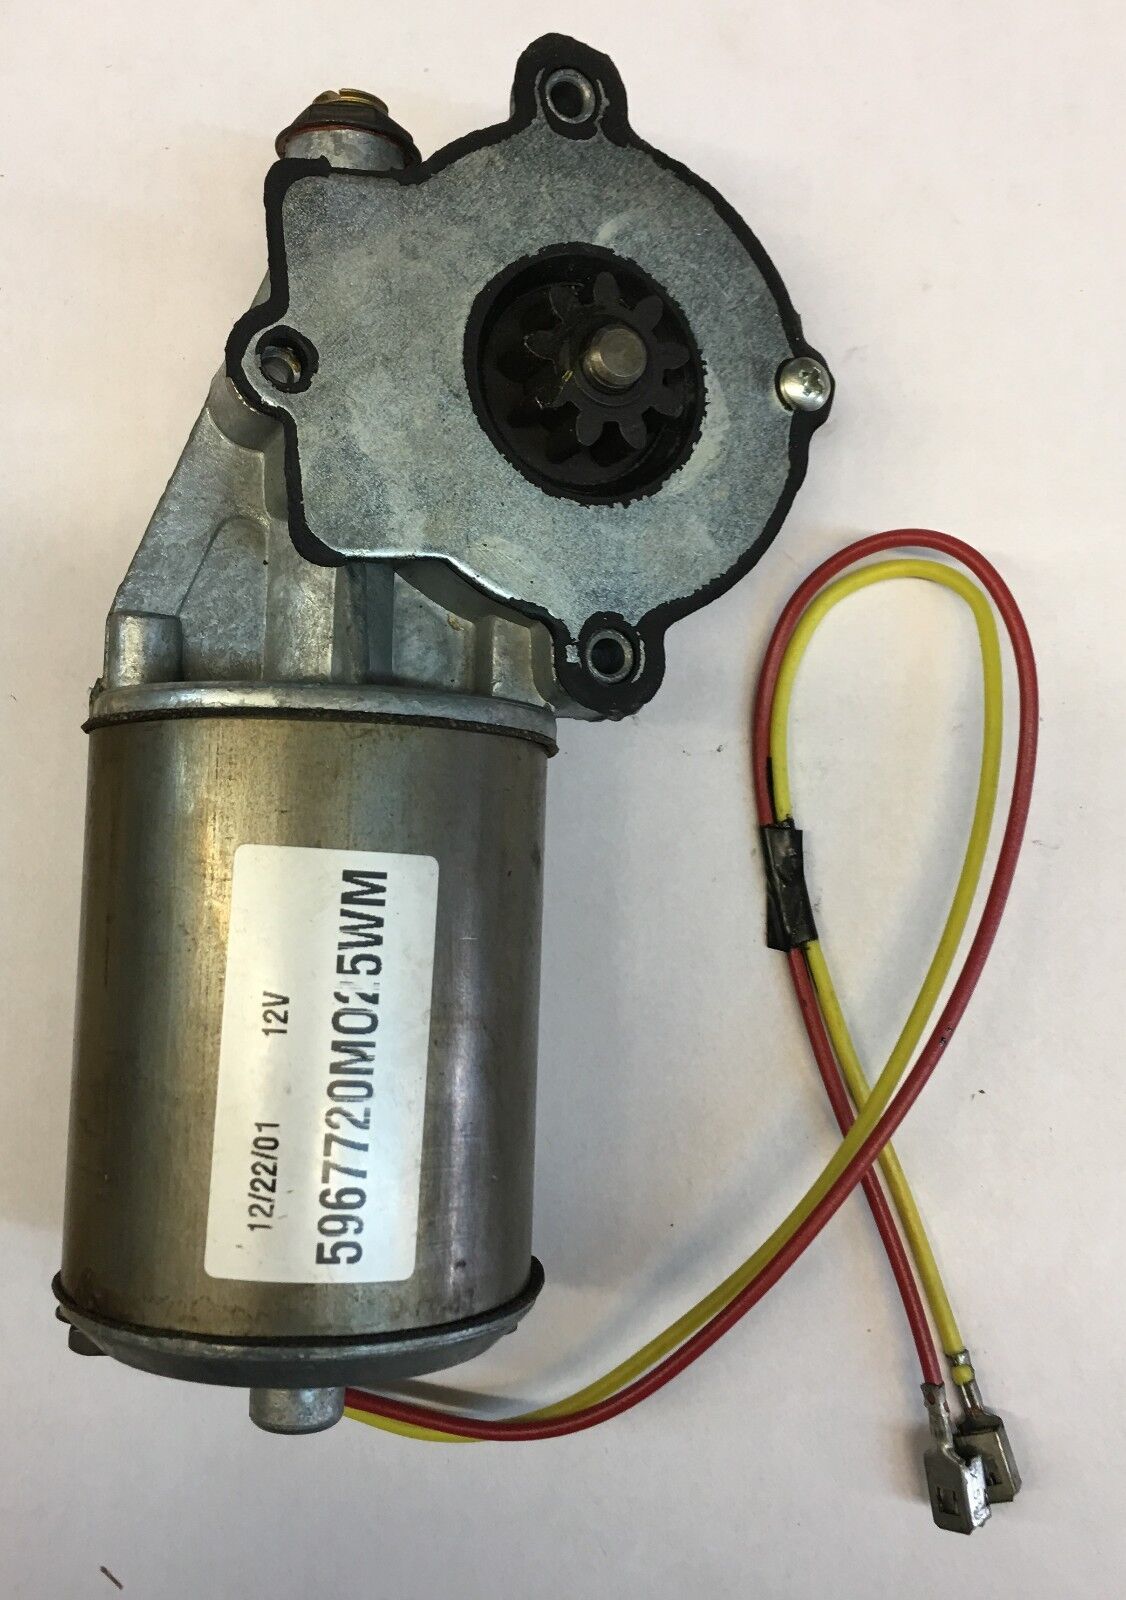  TAILGATE WINDOW LIFT MOTOR fits: FORD BRONCO 1980-1992 (NEW)